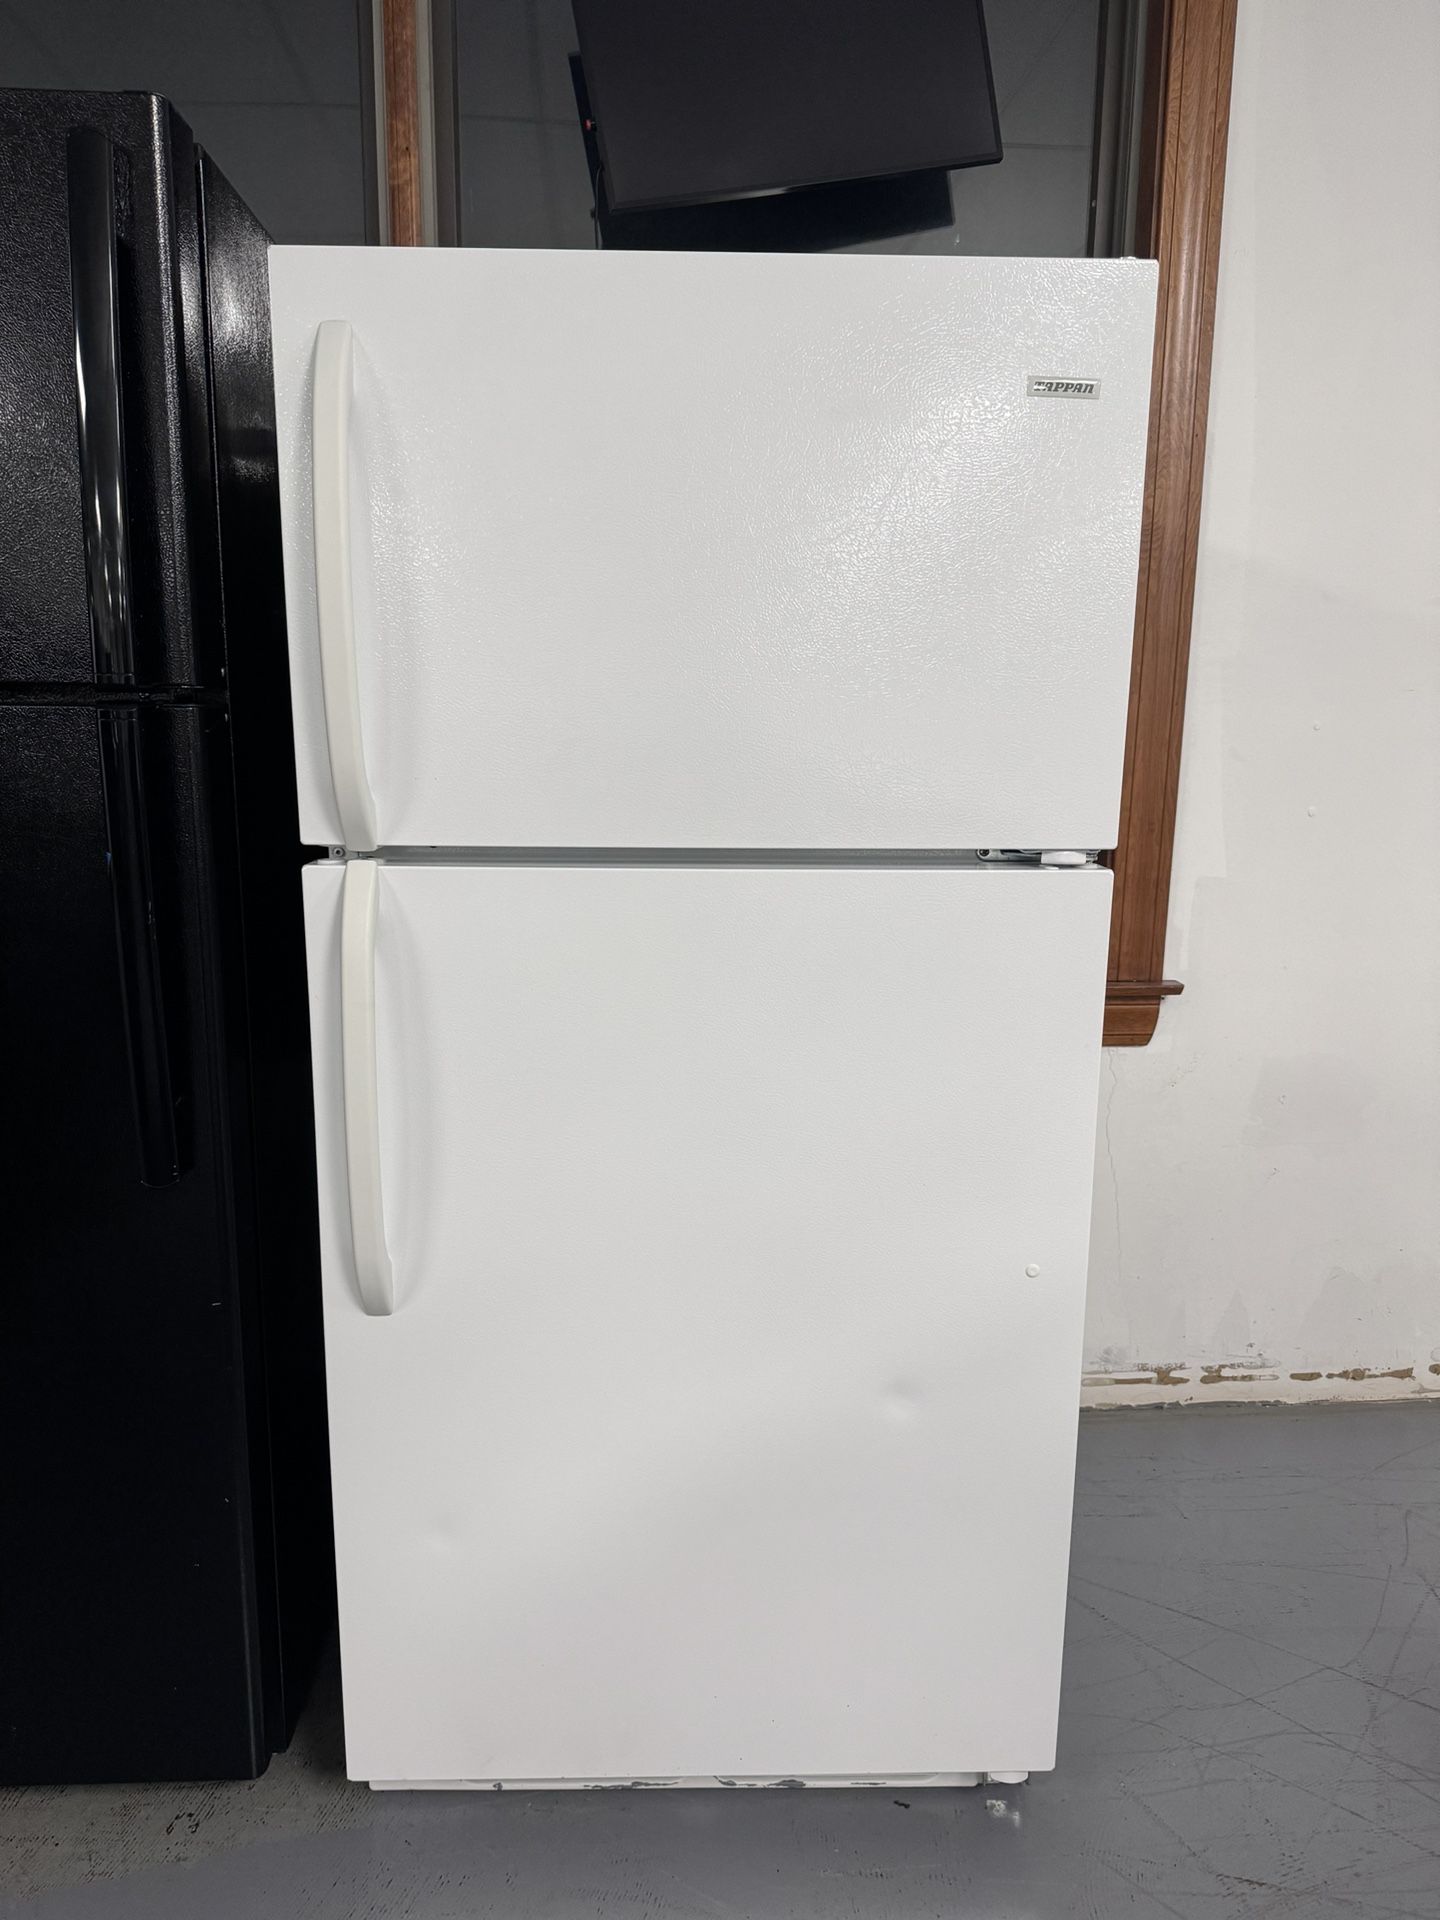 TAPPAN Refrigerator 60 High by 28 Inch Wide Like New Everything Works perfectly  Very Clean 1216 Hartford Turnpike Vernon CT 